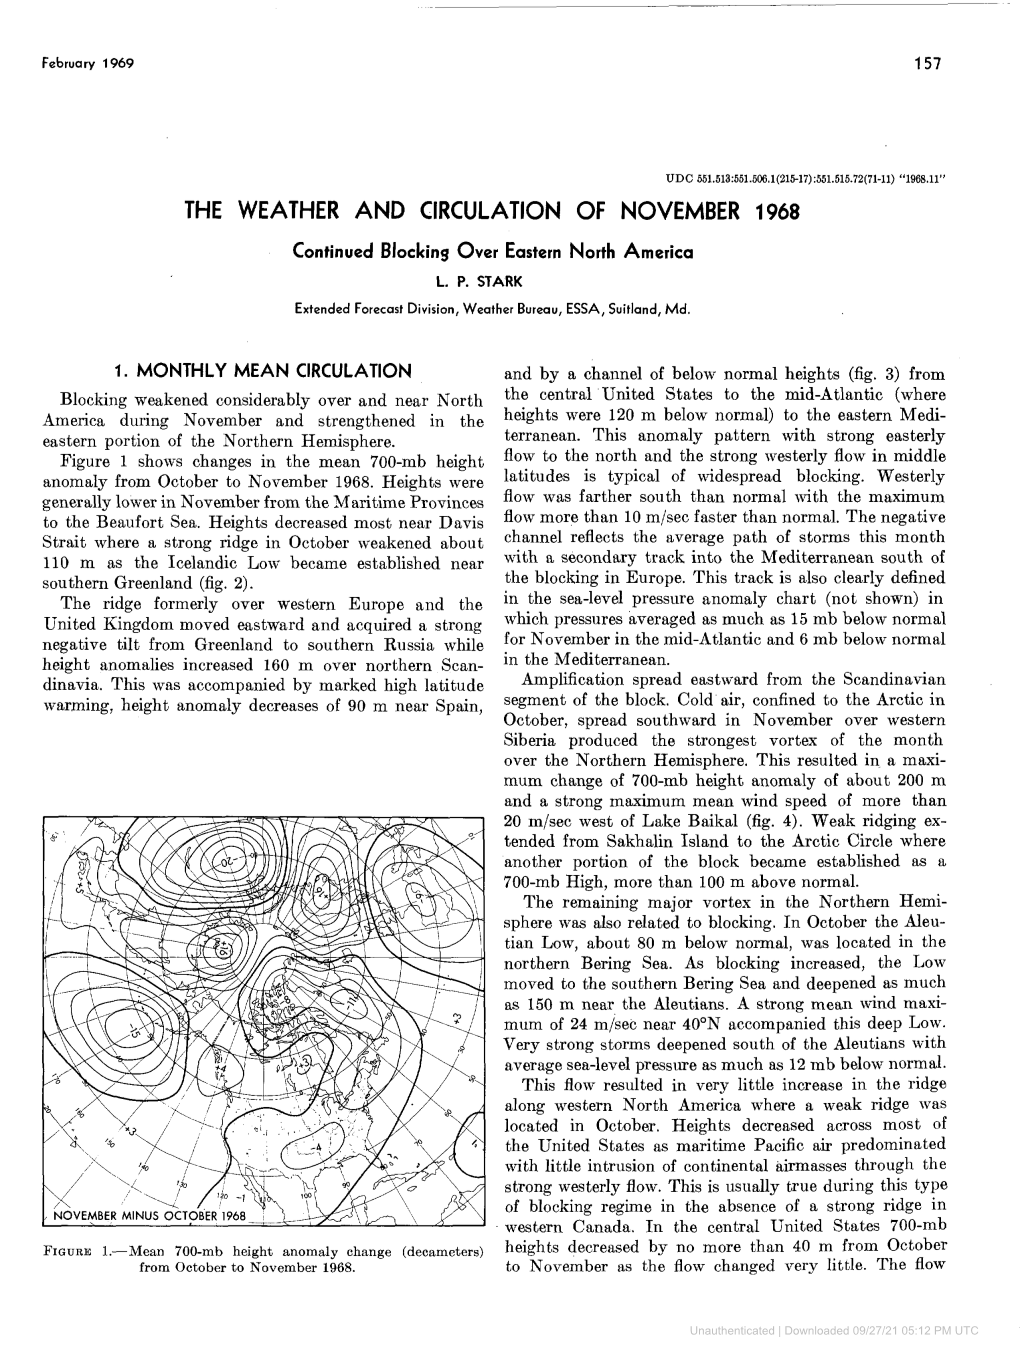 The Weather and Circulation of November 1968